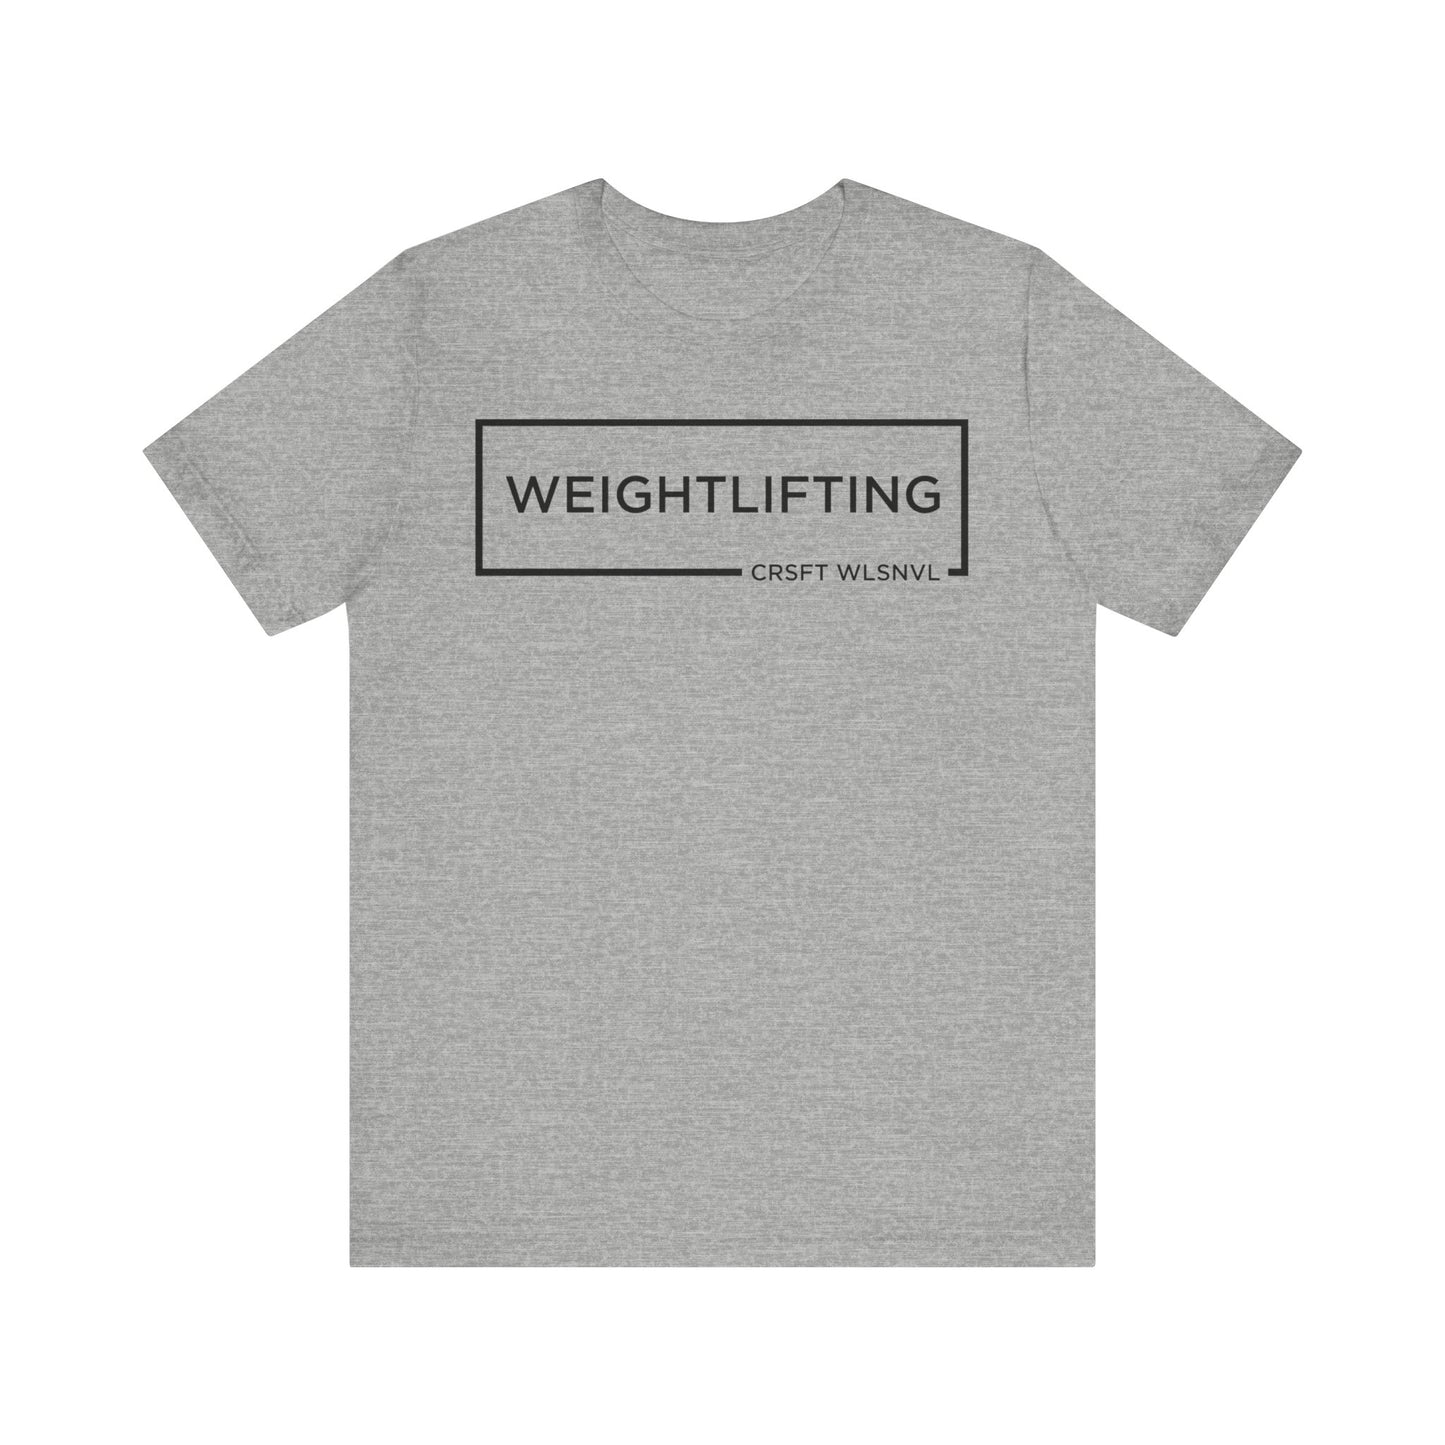 Weightlifting T shirts